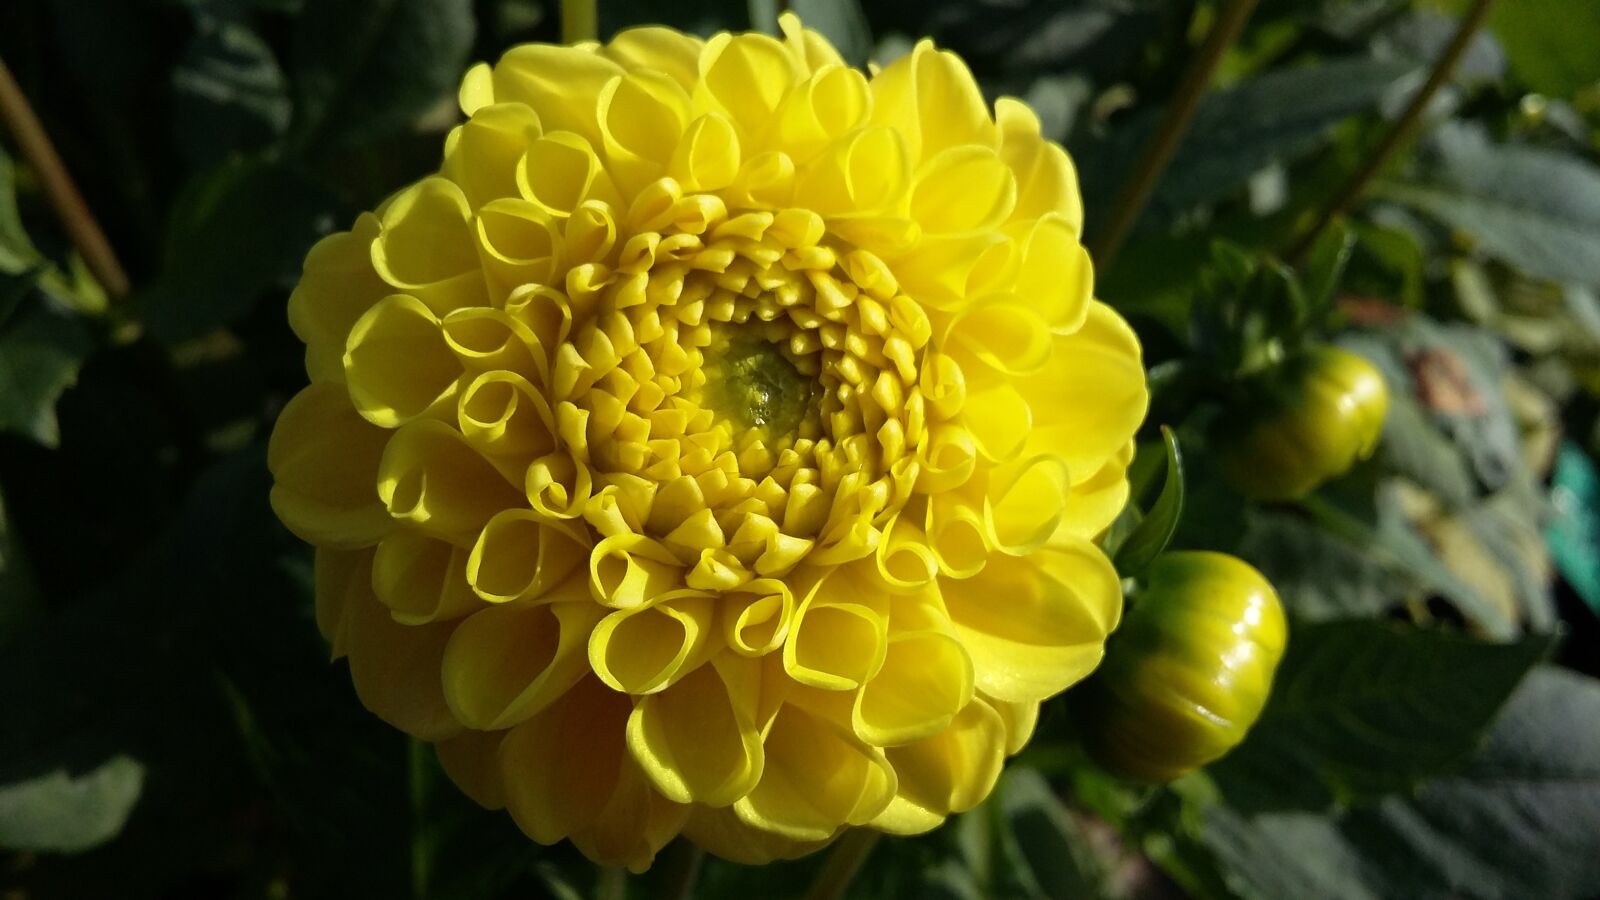 Samsung Galaxy A3 sample photo. Flower, nature, yellow photography